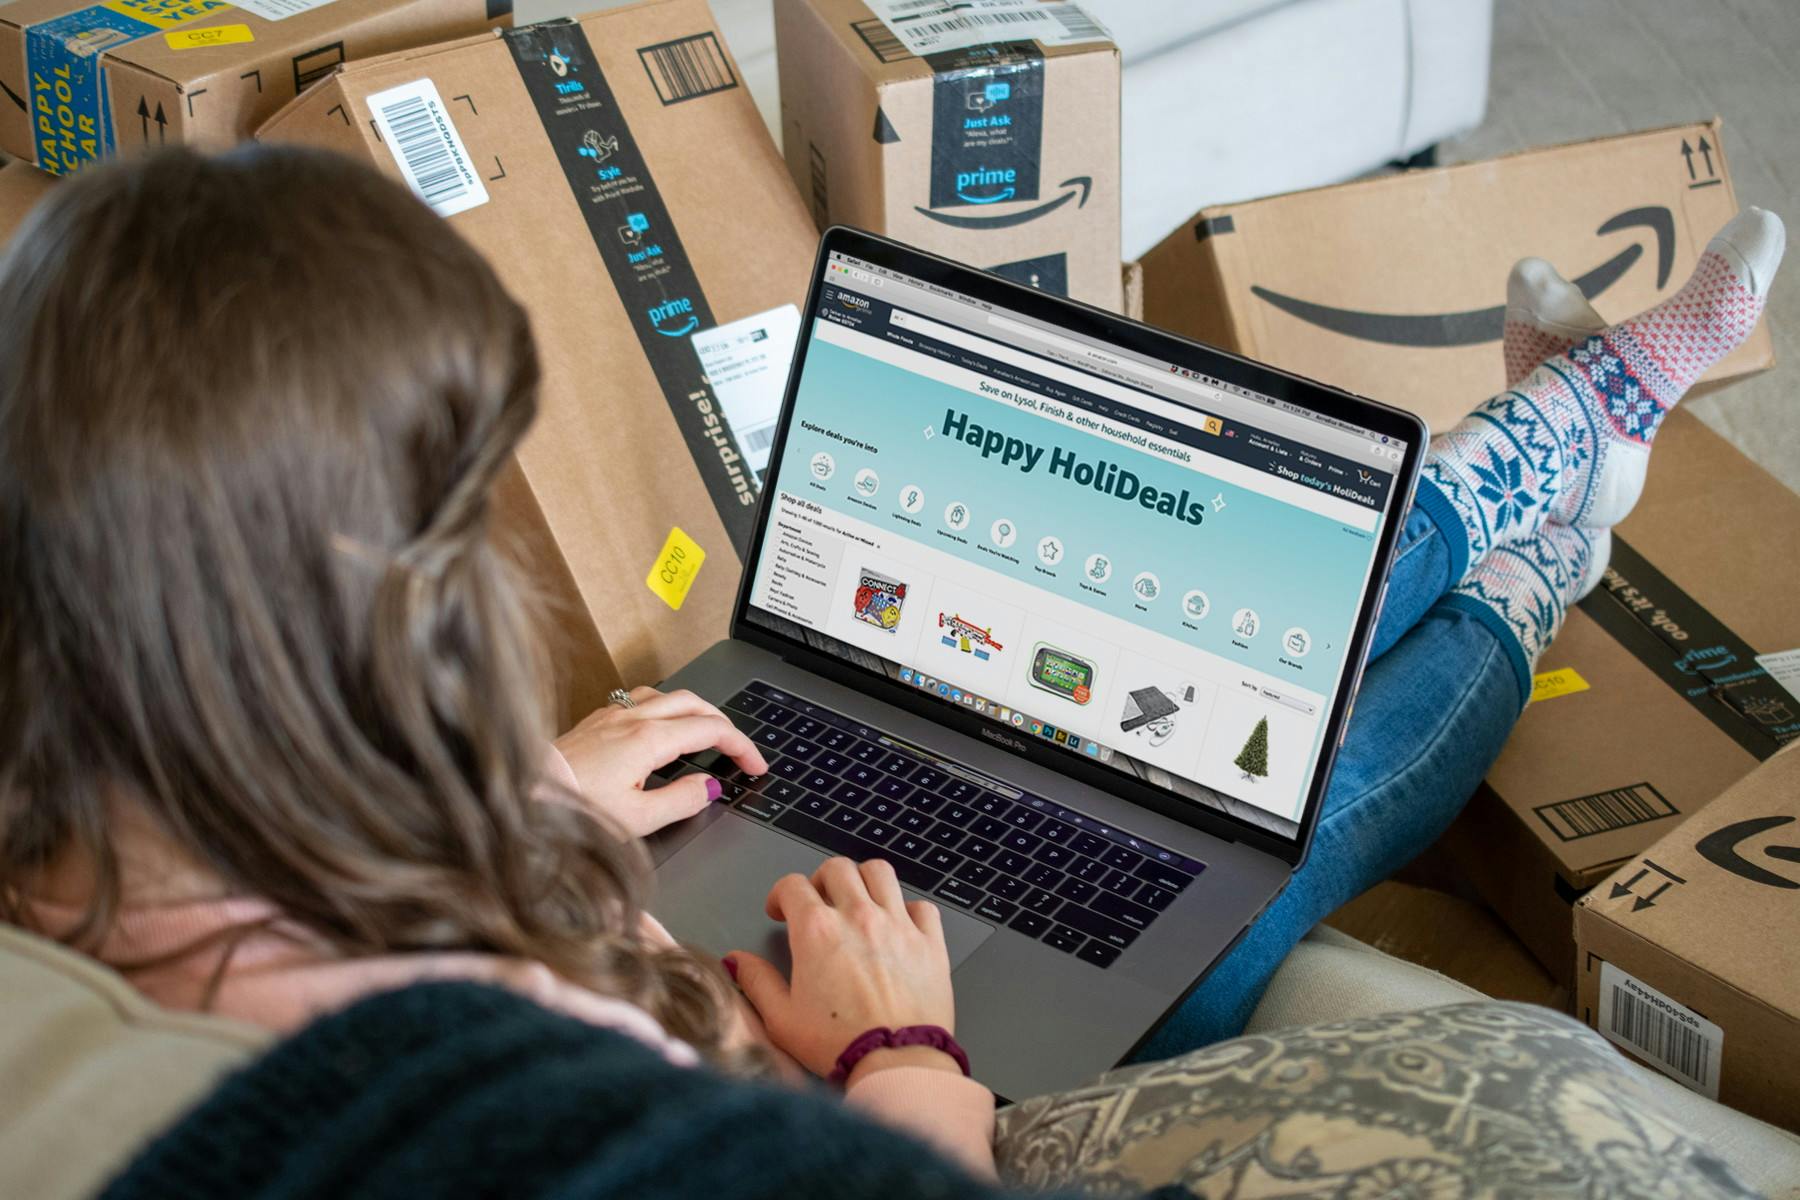 15 Amazon Black Friday 2019 Hacks You Must Know - The Krazy Coupon Lady